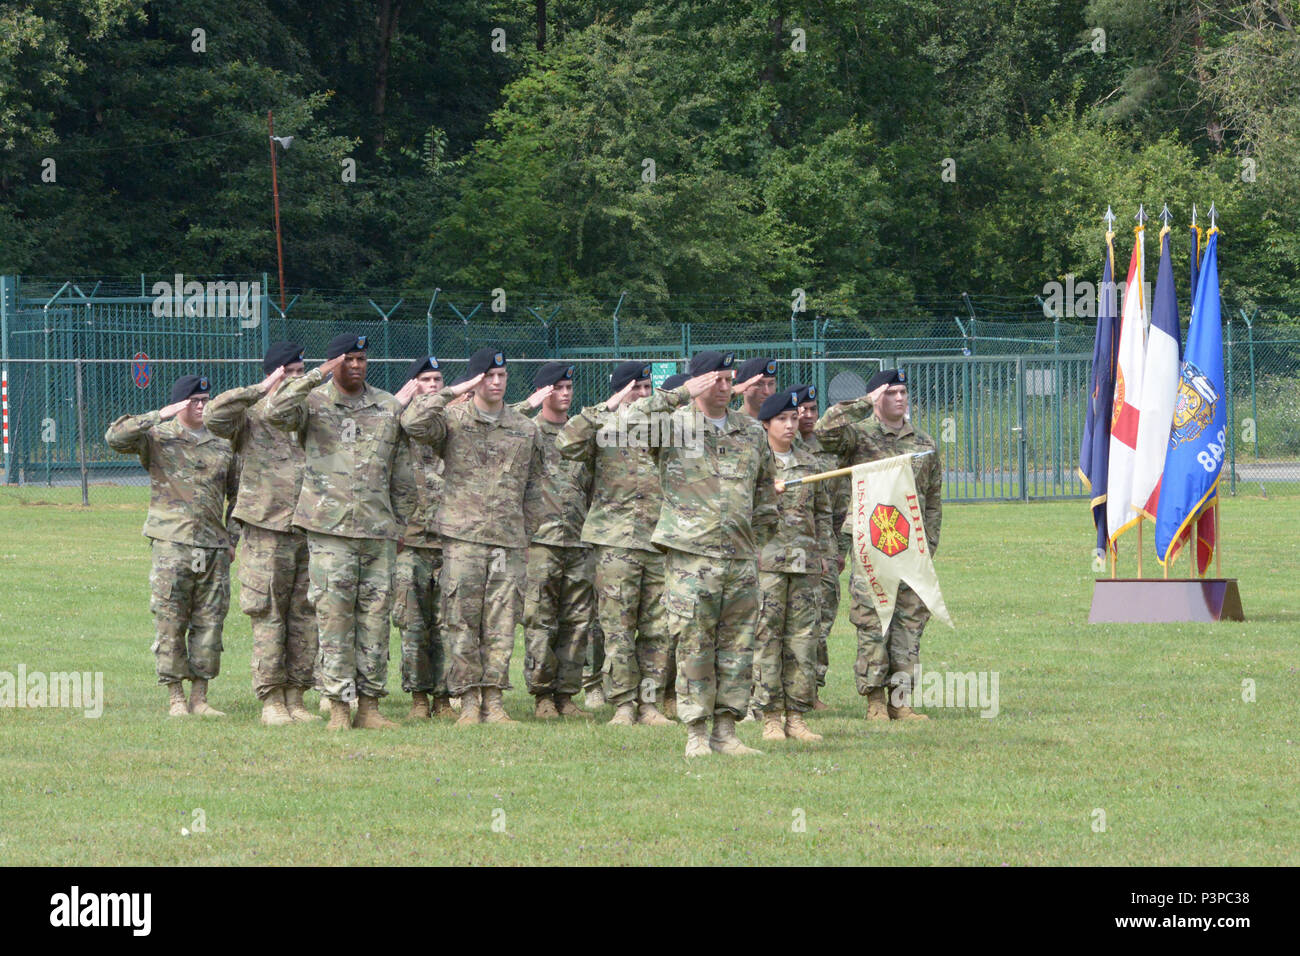 ANSBACH, Germany (July 21, 2016) – Soldiers of Headquarters and Headquarters Detachment, U.S. Army Garrison Ansbach, salute. Col. Christopher M. Benson relinquished garrison command, and Col. Benjamin C. Jones assumed command during a change of command ceremony Monday on Barton Barracks athletic field here. Stock Photo